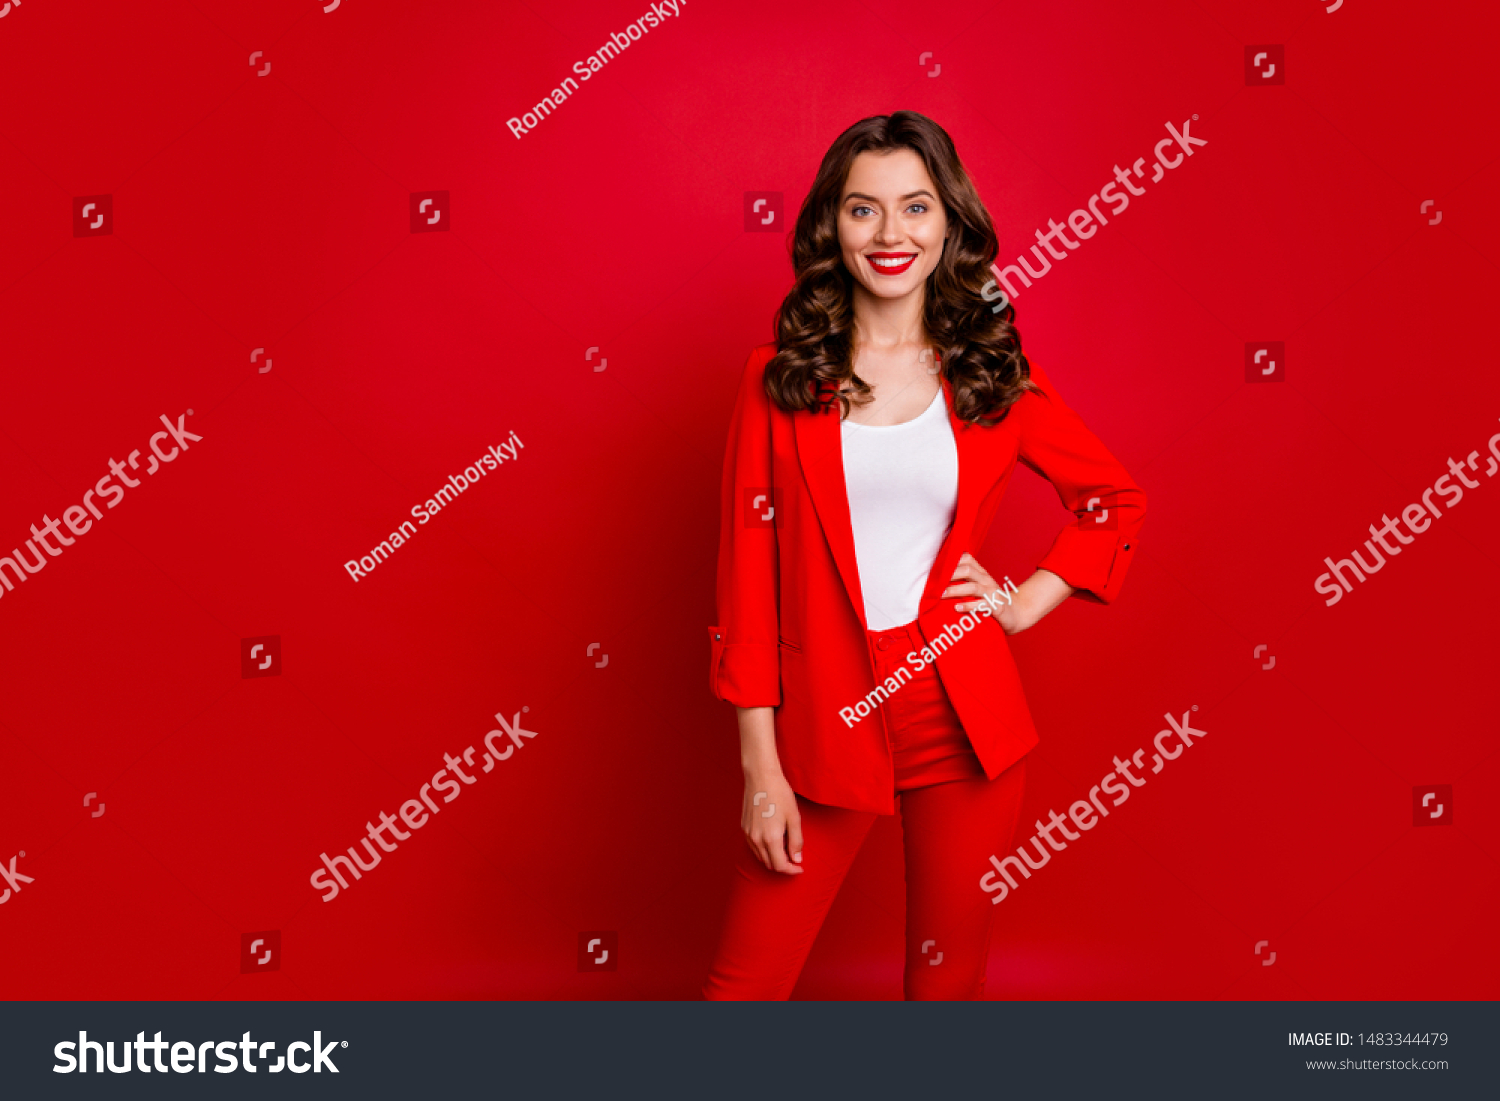 Portrait of elegant lady looking with toothy smile wearing suit isolated over red background #1483344479